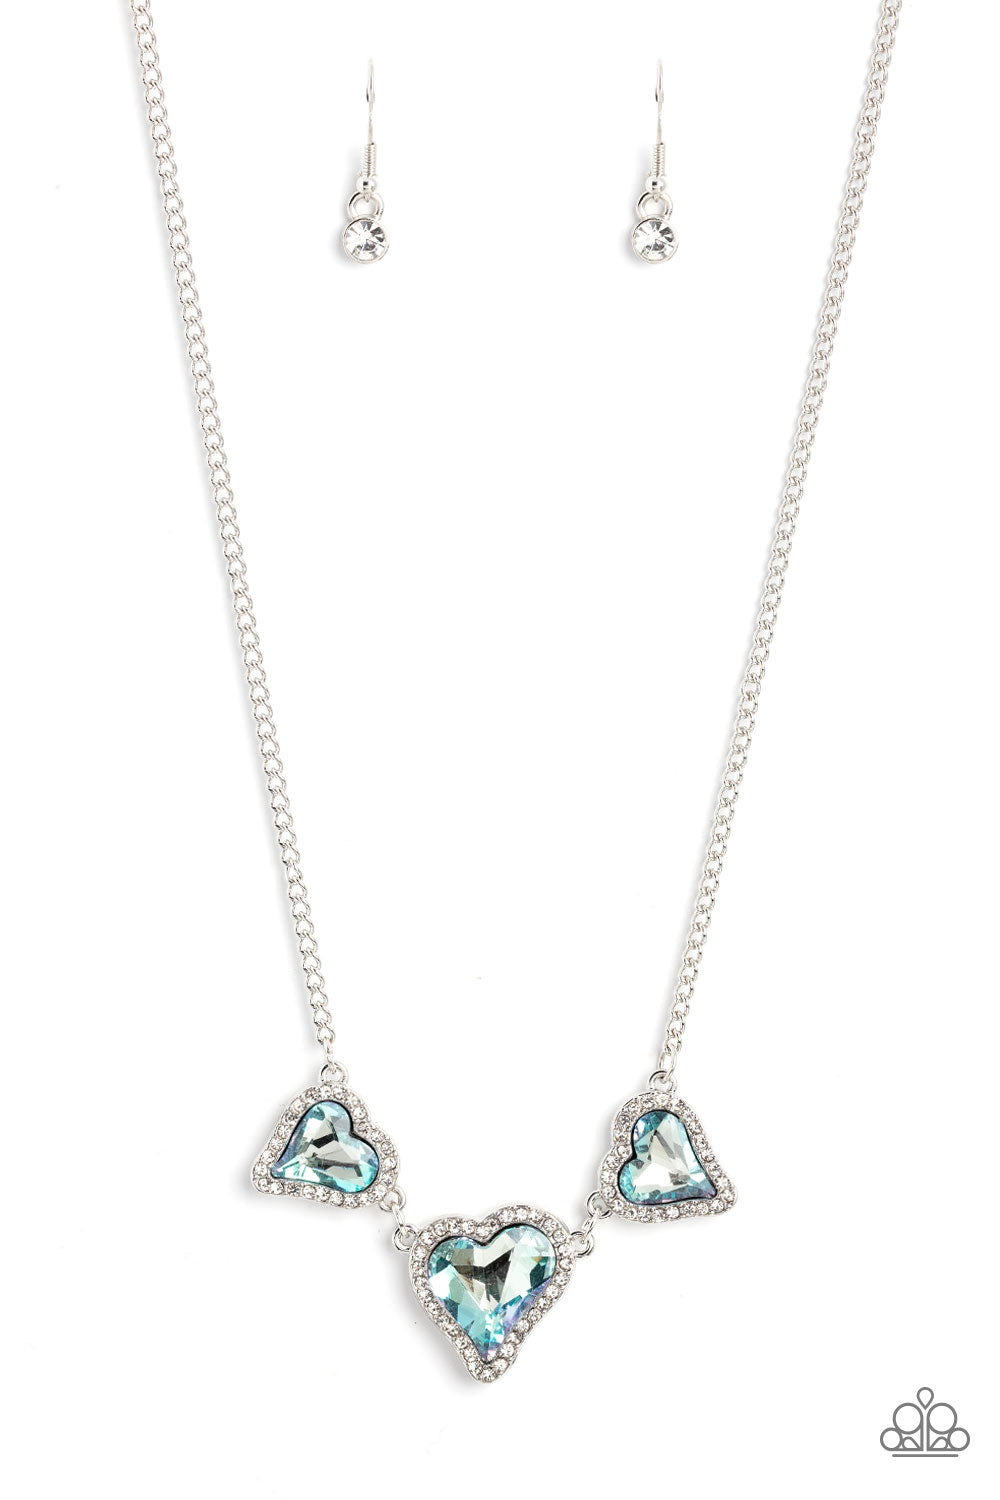 five-dollar-jewelry-state-of-the-heart-blue-necklace-paparazzi-accessories